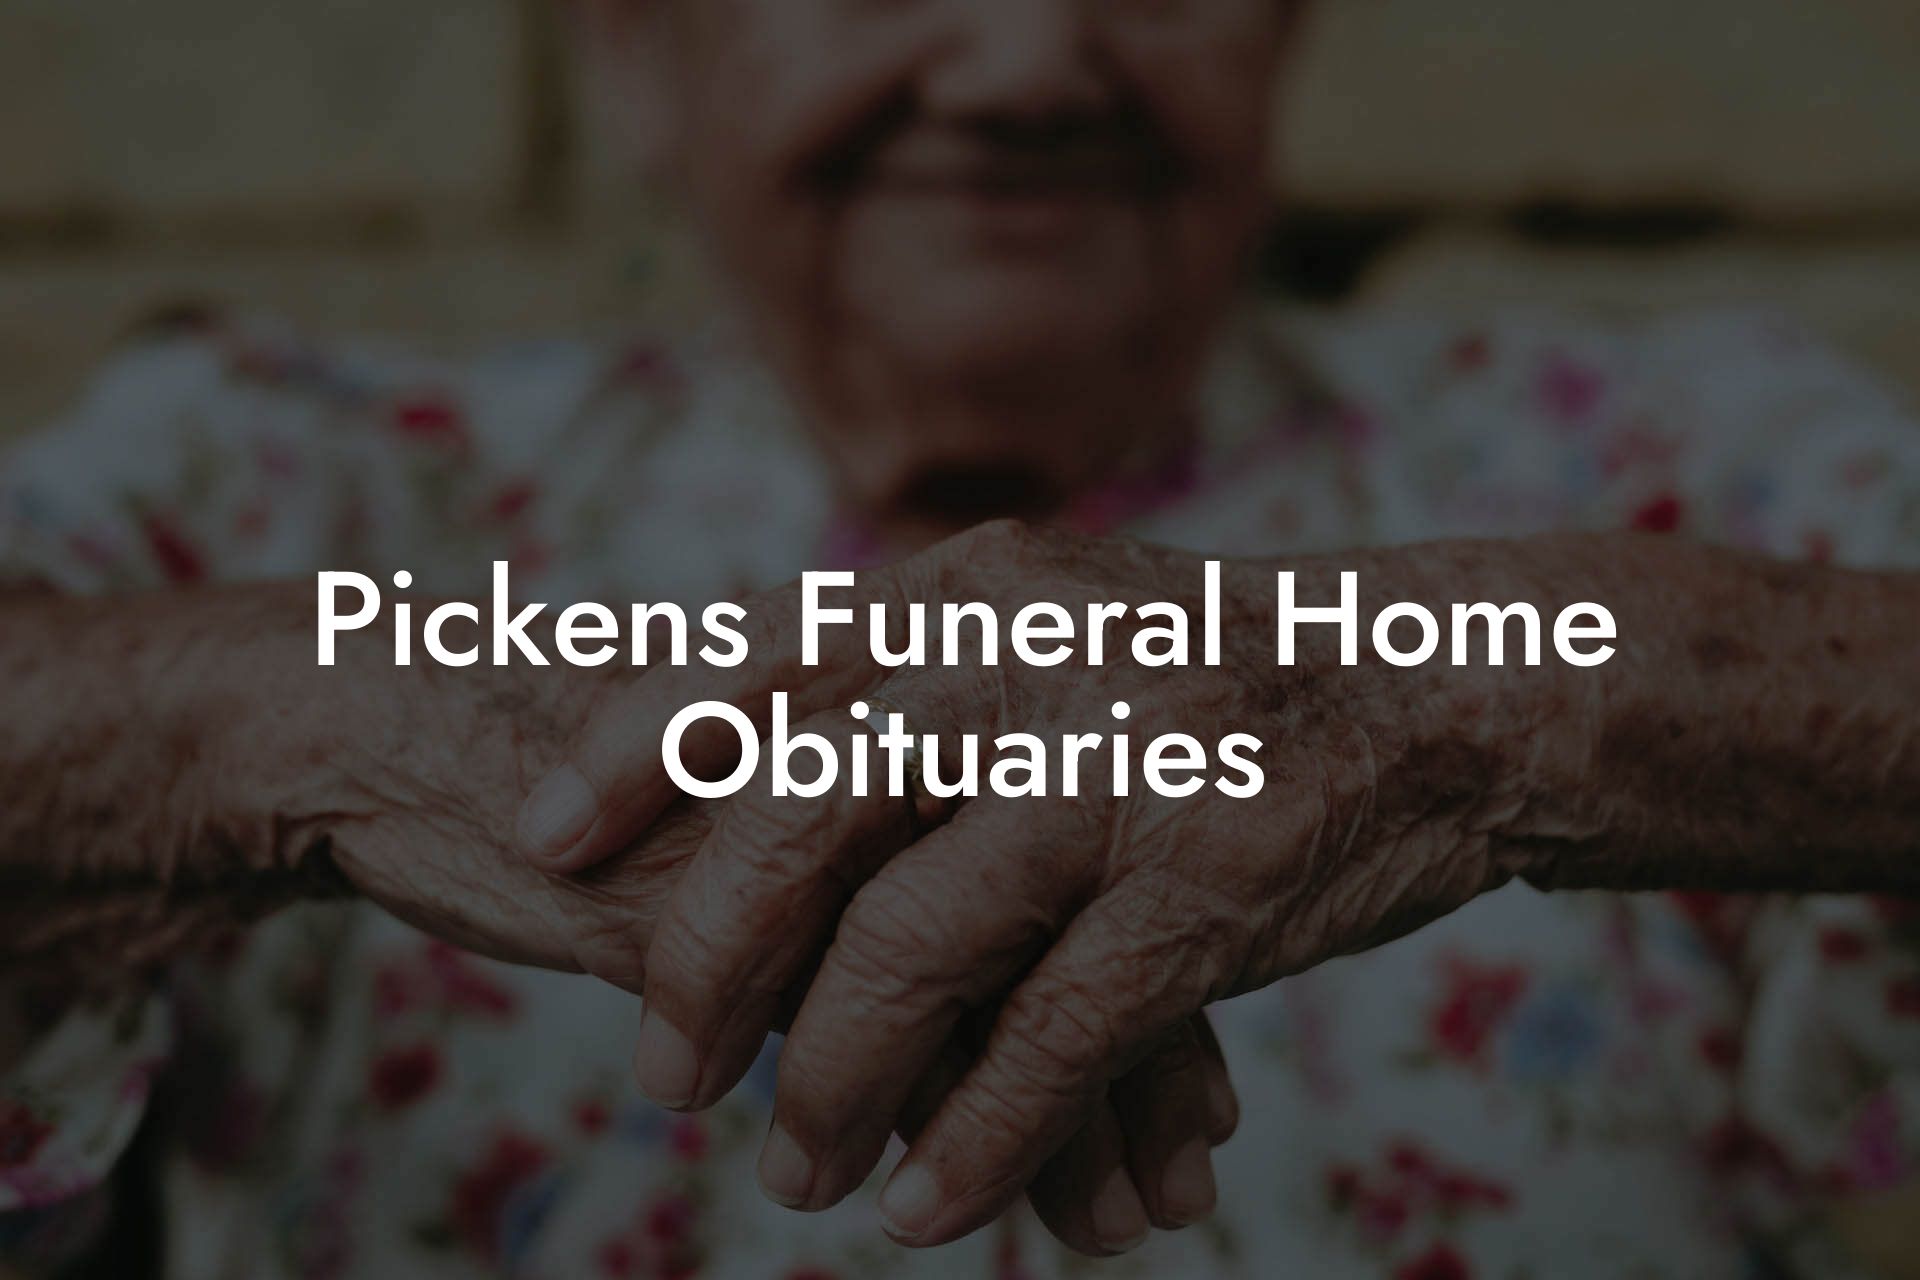 Pickens Funeral Home Obituaries